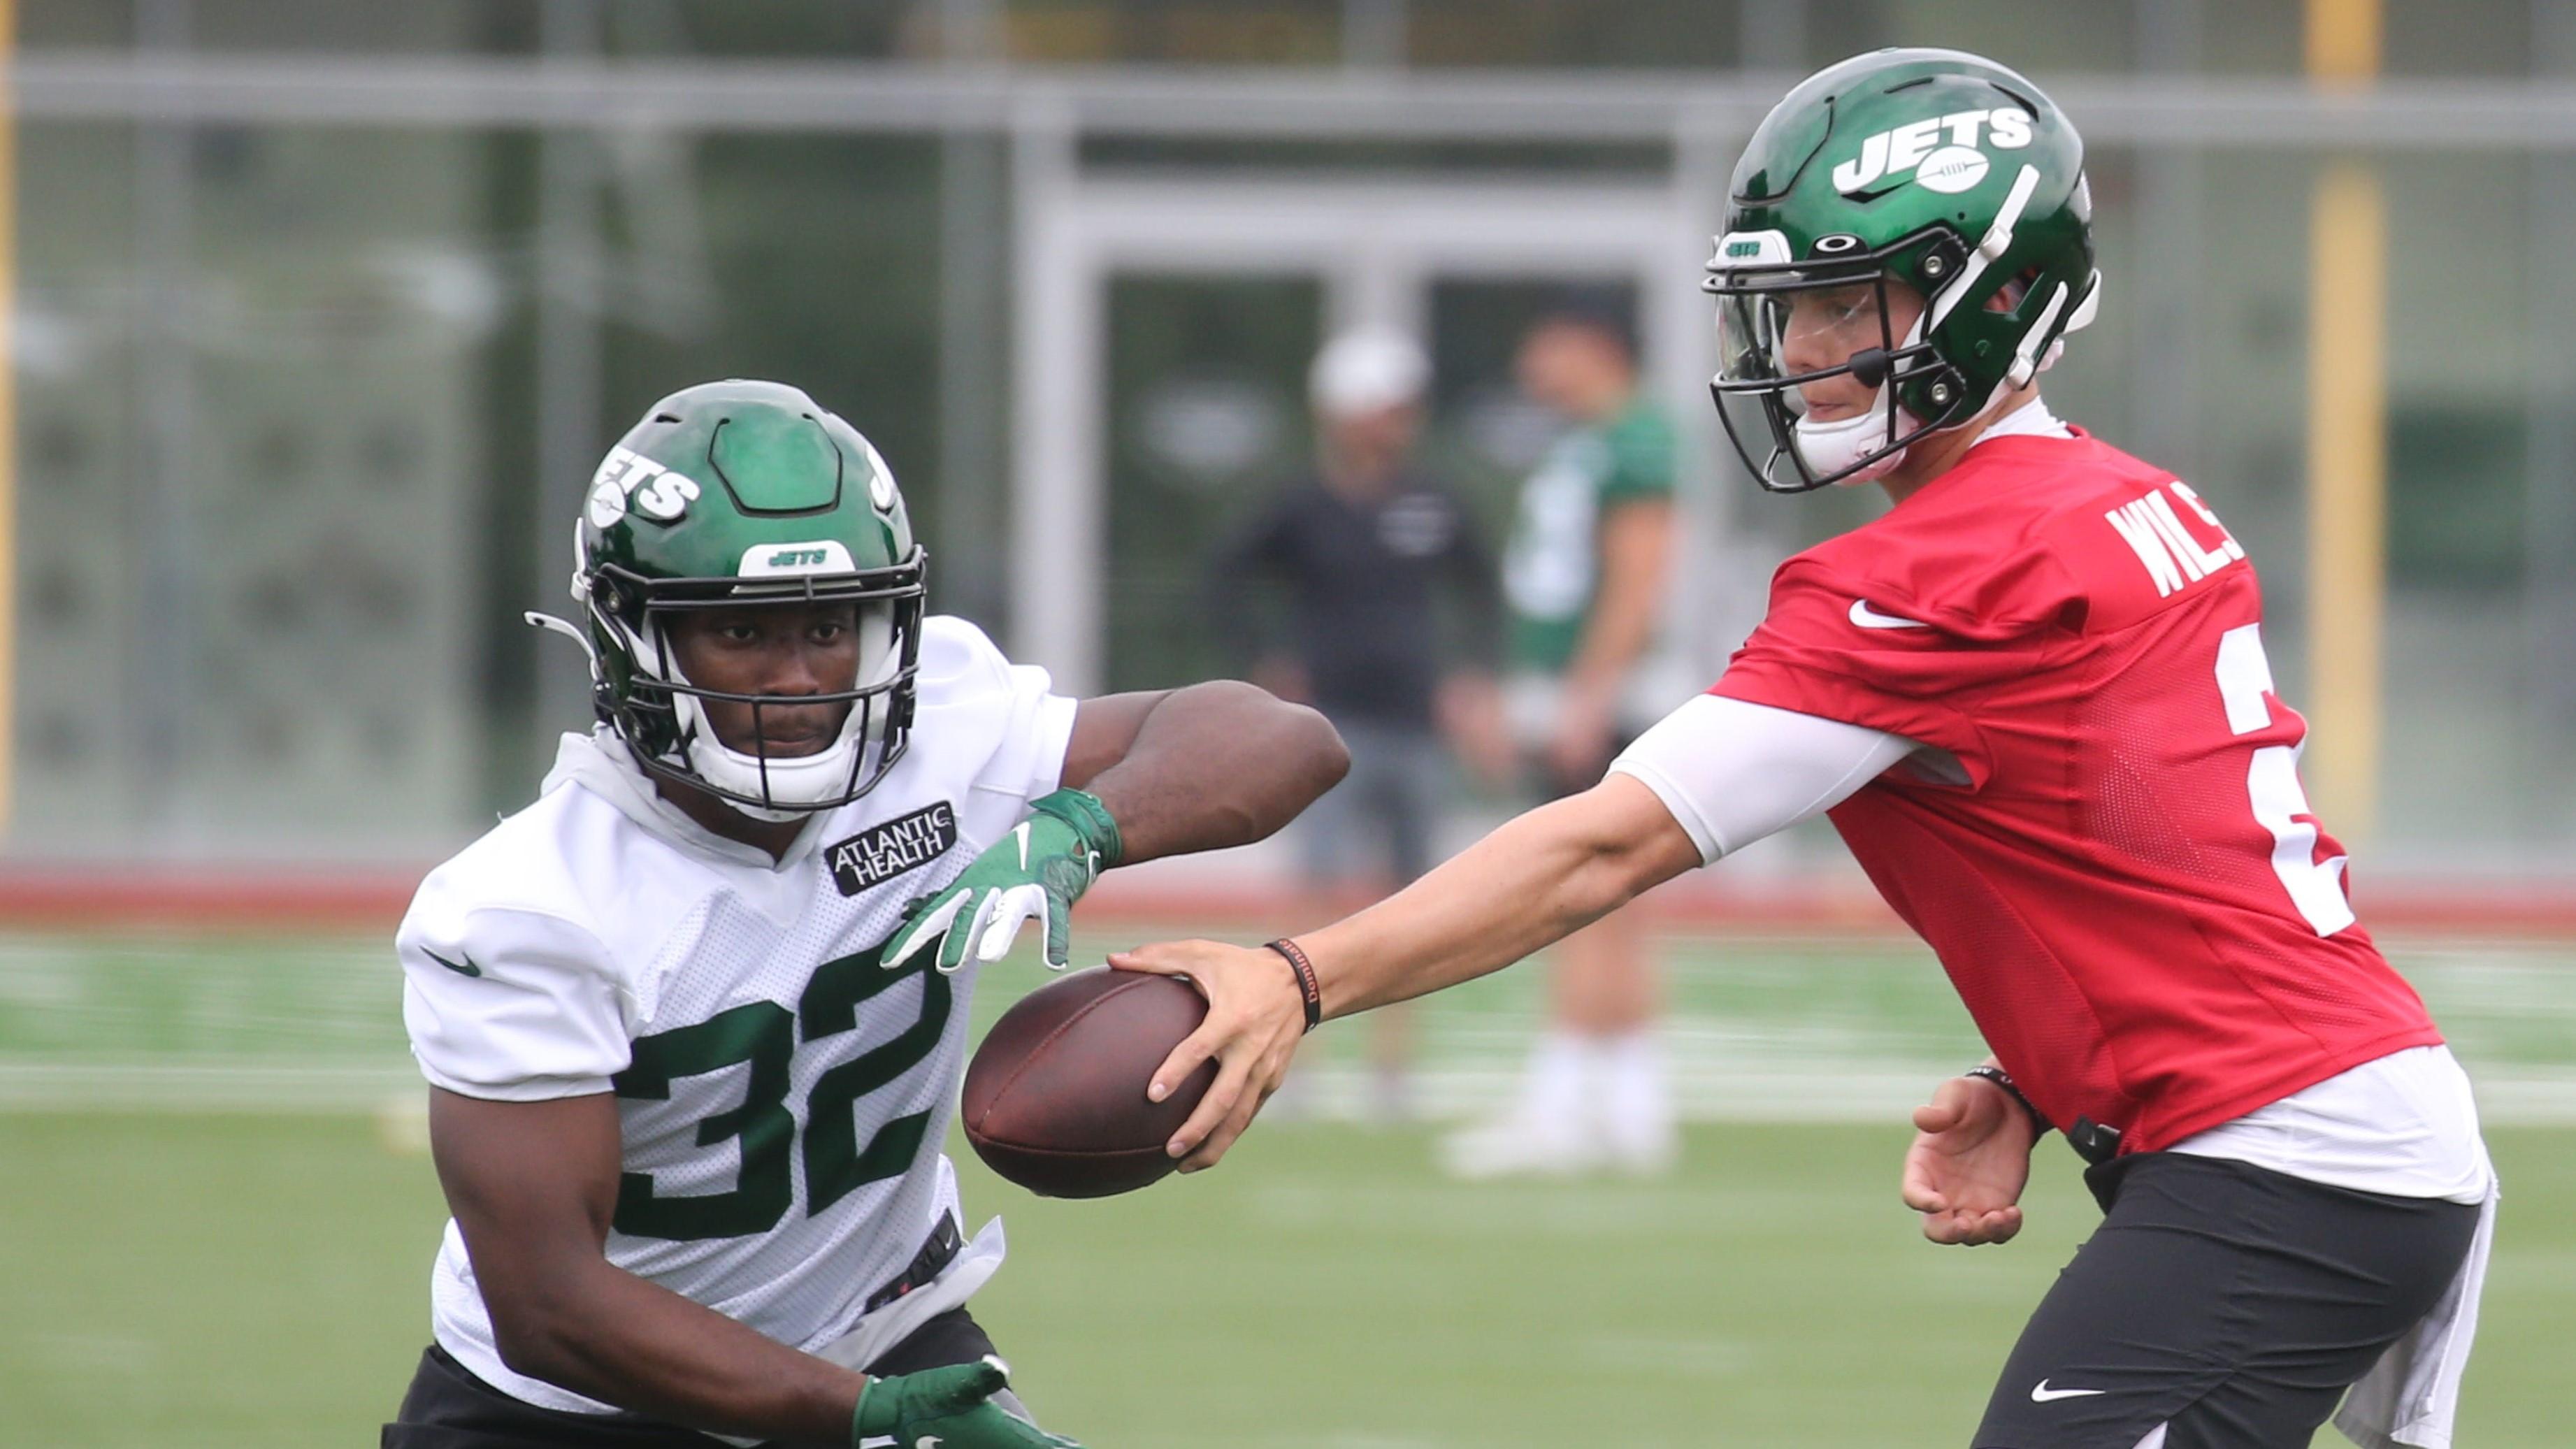 Quarterback, Zach Wilson hands the ball off to Michael Carter while participating in practice as the New York Jets held OTA's this morning at their practice facility in Florham Park, NJ on June 4, 2021. The New York Jets Held Ota S This Morning At Their Practice Facility In Florham Park Nj On June 4 2021 / Chris Pedota, NorthJersey.com via Imagn Content Services, LLC